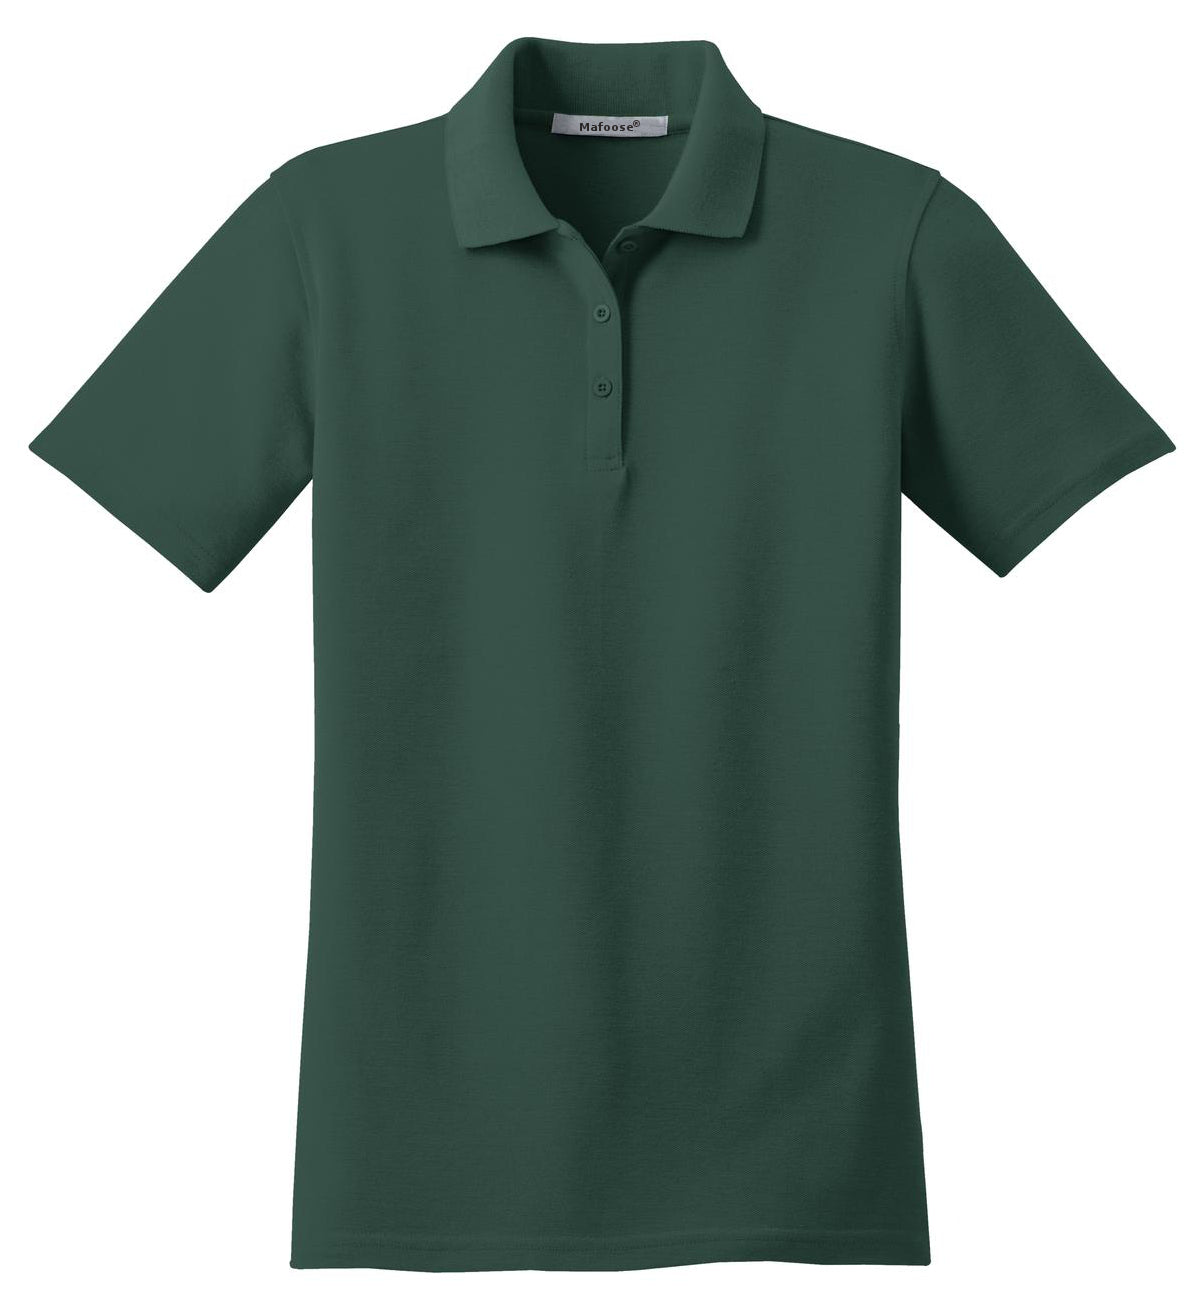 Mafoose Women's Stain Resistant Polo Shirt Dark Green-Front